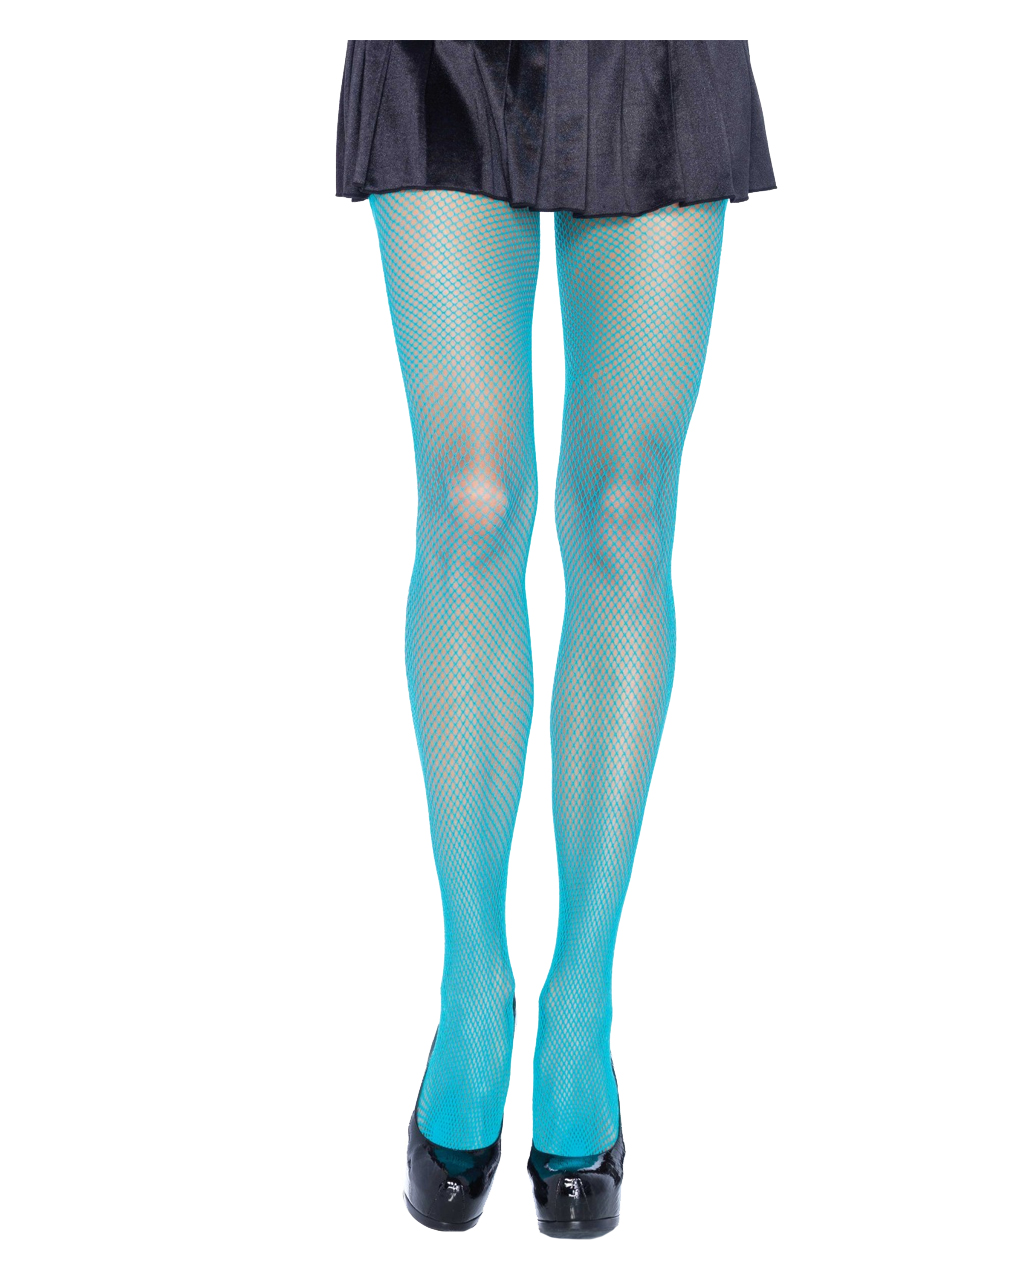 Neon Turquoise 80s Fishnet Tights for Bath Button Party